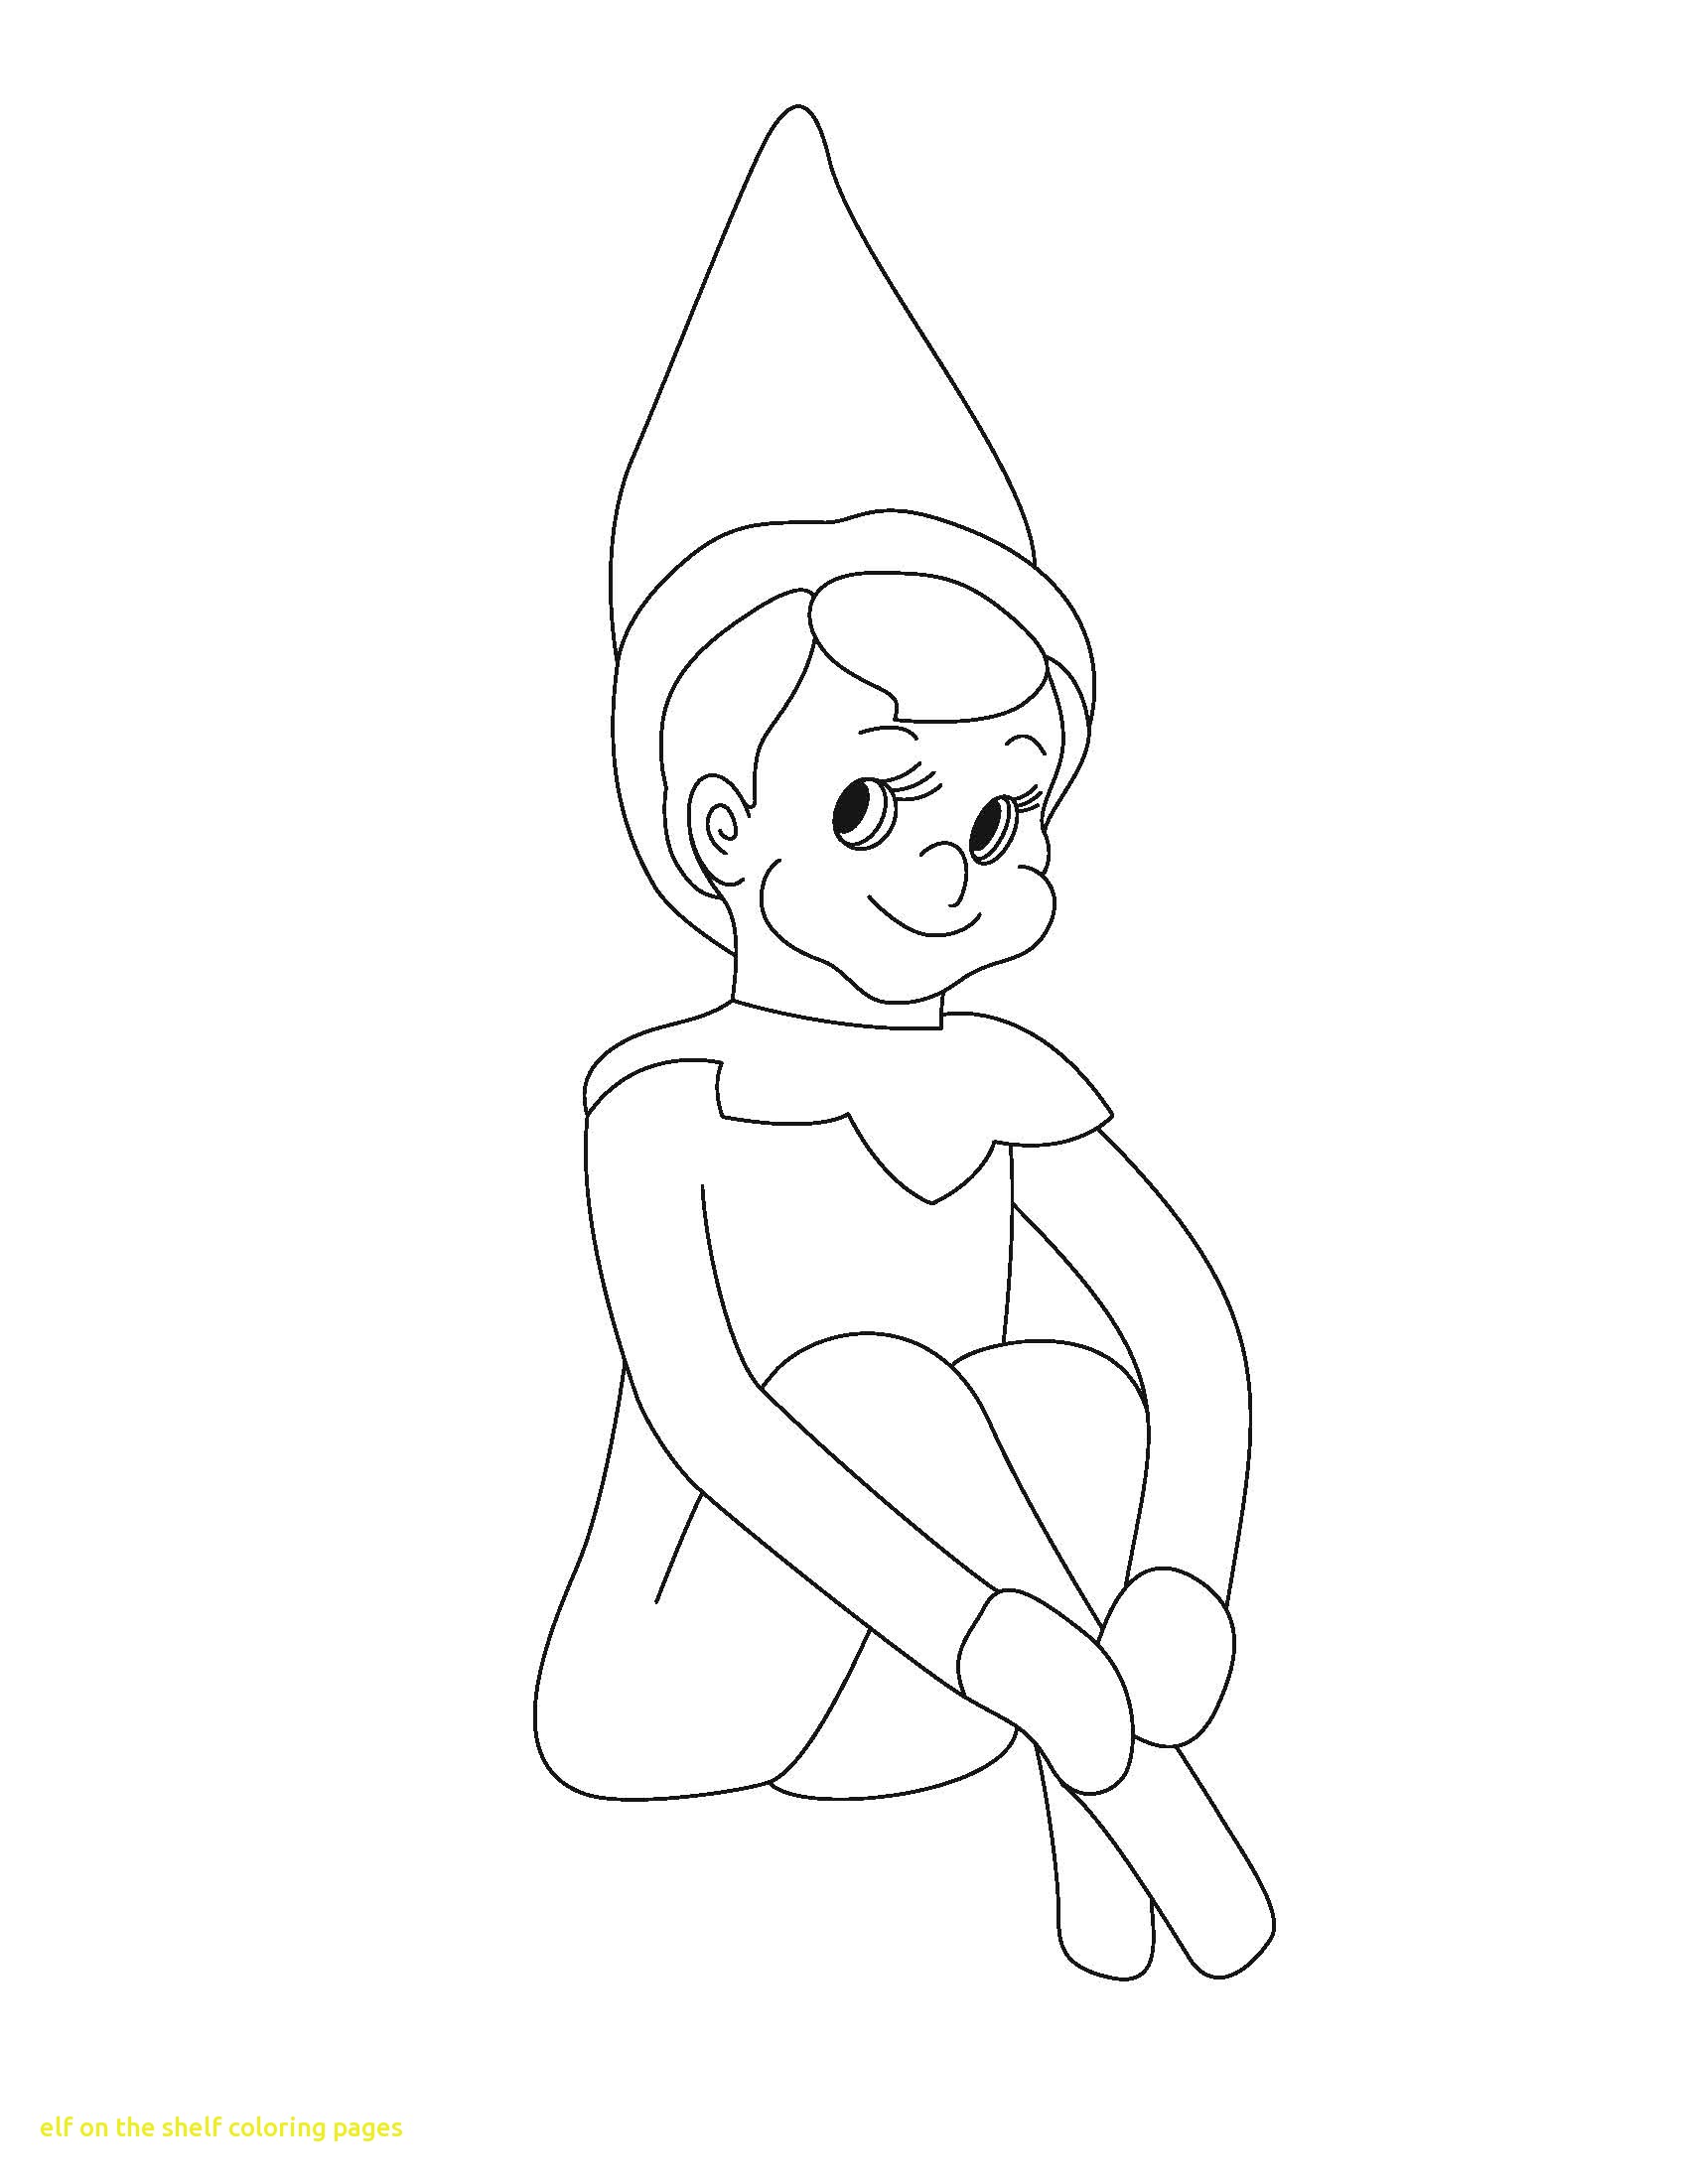 Girl Elf On The Shelf Coloring Pages At GetDrawings Free Download